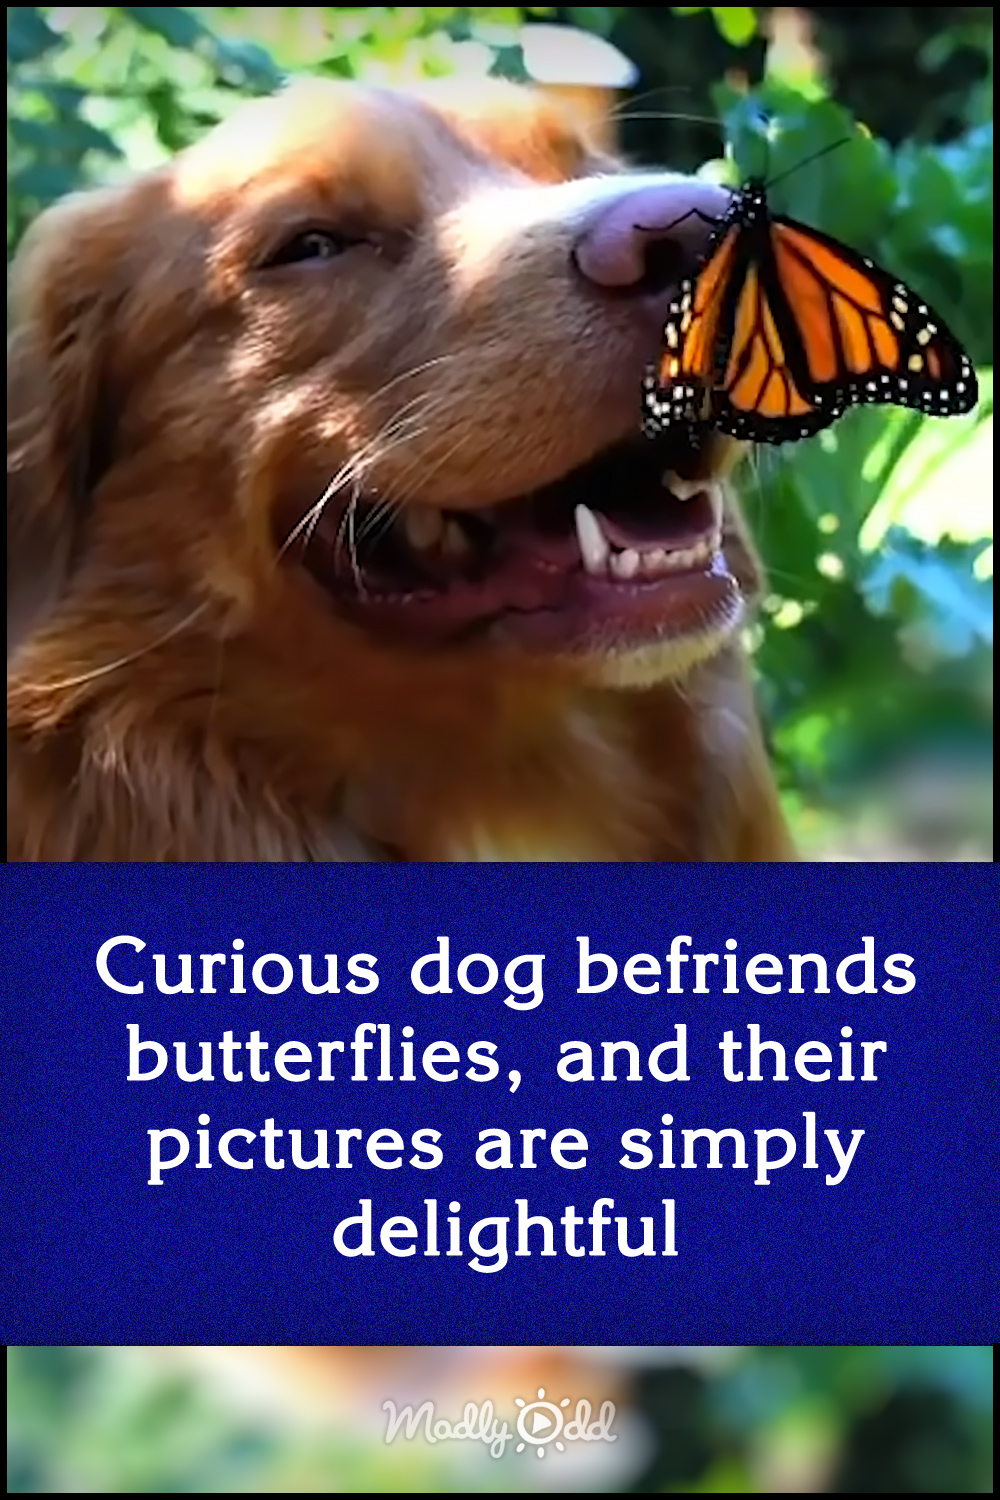 Curious dog befriends butterflies, and their pictures are simply delightful